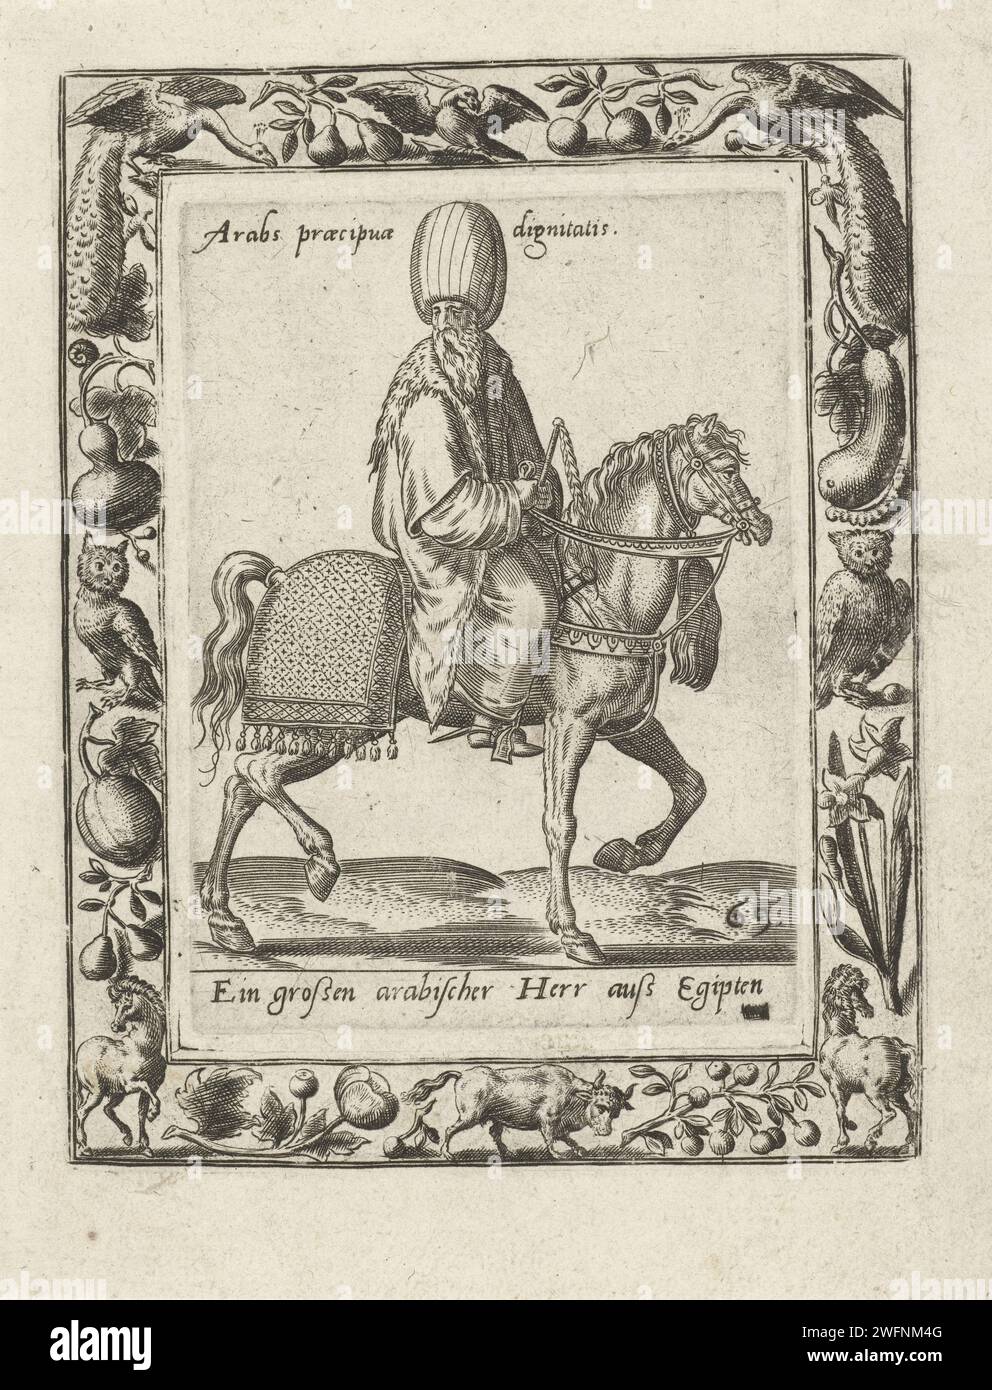 Arab man on horseback, Abraham de Bruyn (attributed to), 1577  Cartouche with image of horse and rider to the right. The horse is in step. The rider is dressed as an Arabian Lord. He has a staff in his hand. The print has a German caption and Latin inscription. Print originally from 'Equitum Descripcio ...', 1577. Cologne paper engraving warfare; military affairs (+ cavalry, horsemen). folk costume, regional costume. Asiatic races and peoples (with NAME). feudal lord Stock Photo